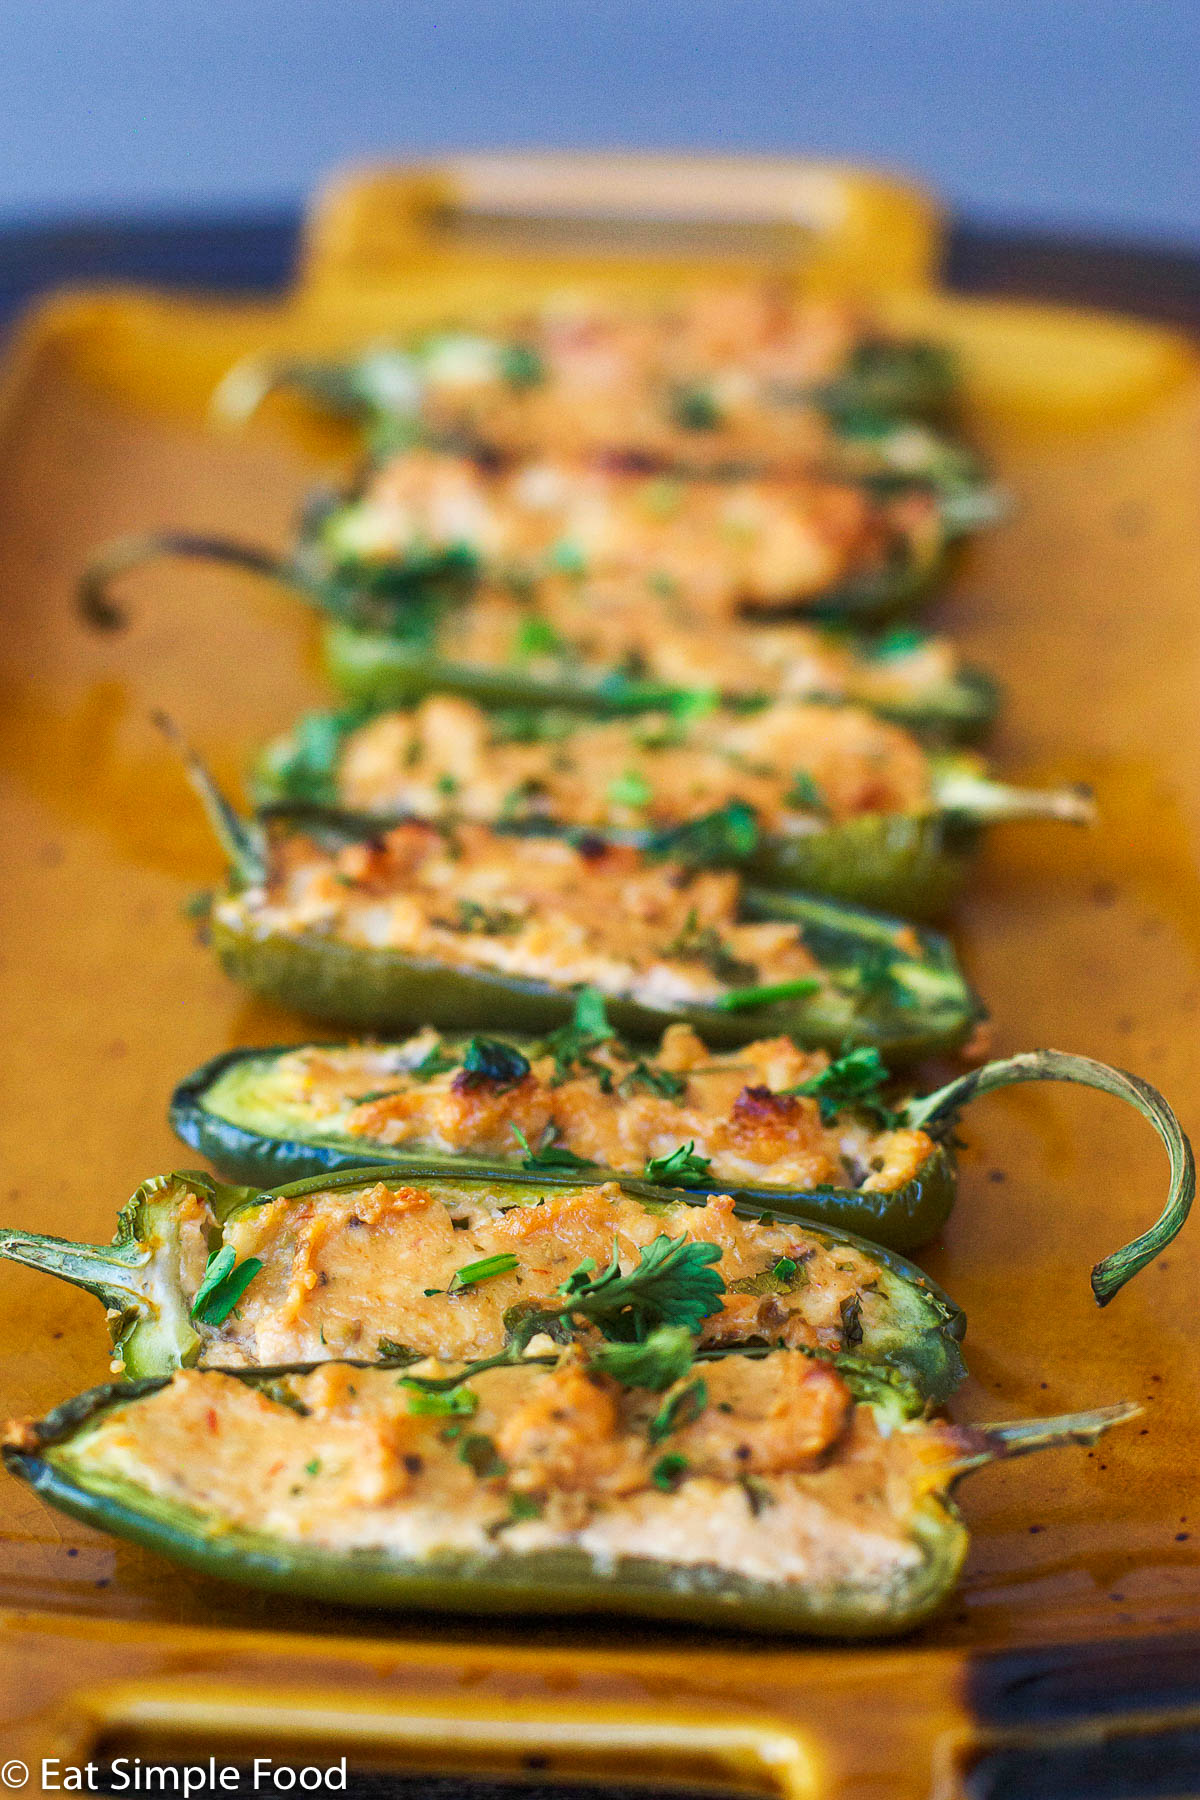 Baked & Stuffed Jalapeno Popper halves on a tan plate filled garnished with parsley | EatSimpleFood.com